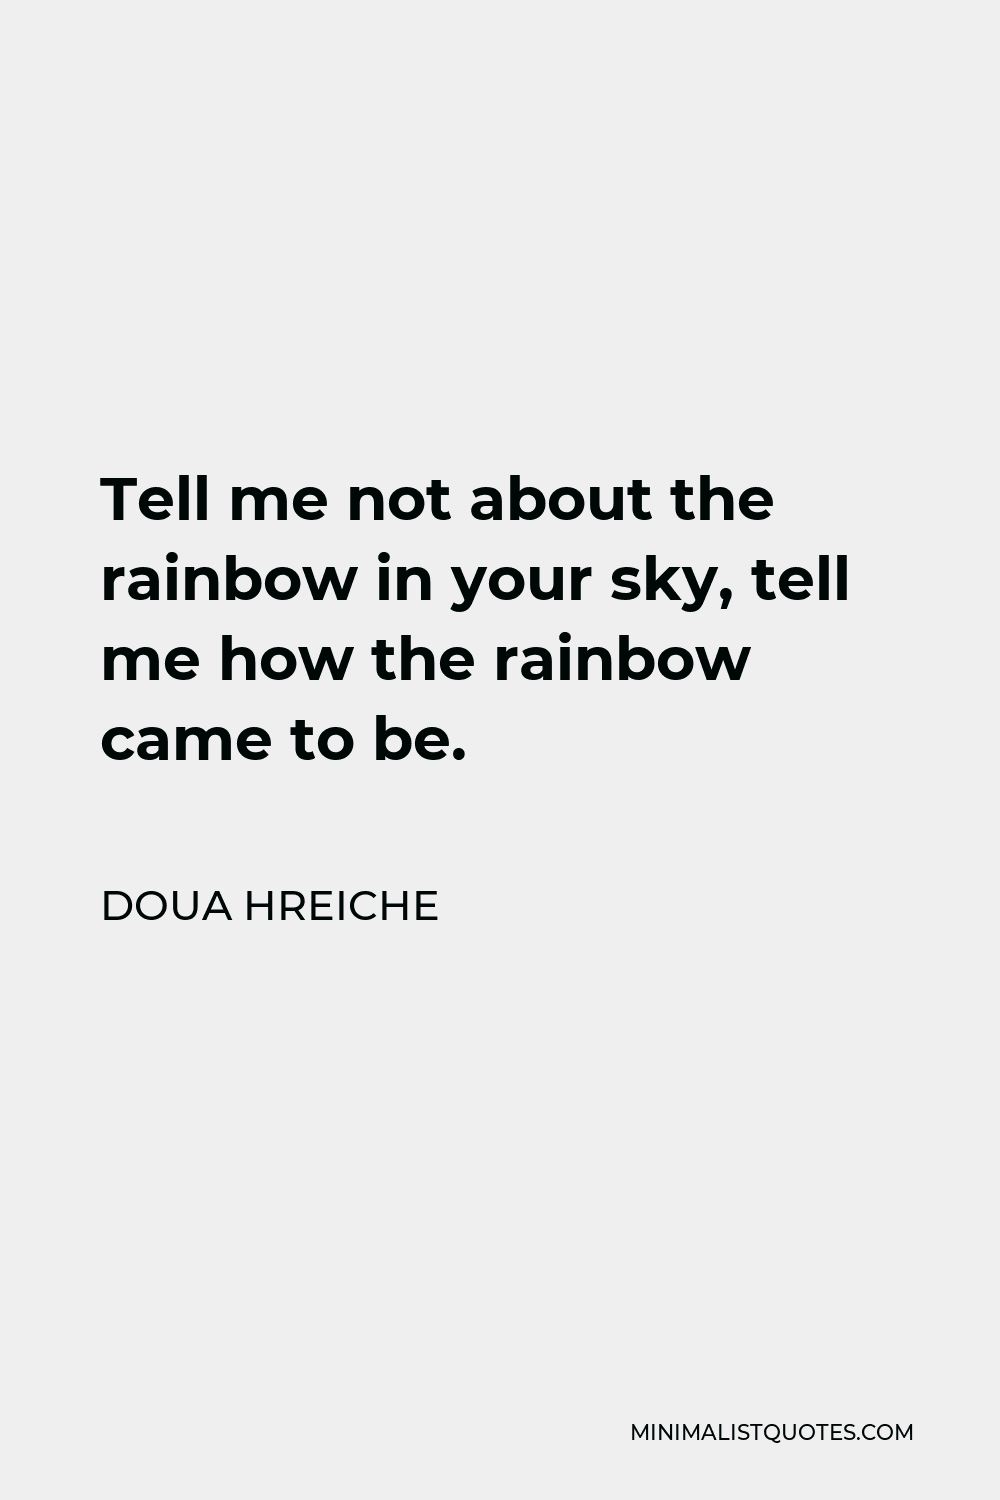 Doua Hreiche Quote - Tell me not about the rainbow in your sky, tell me how the rainbow came to be.